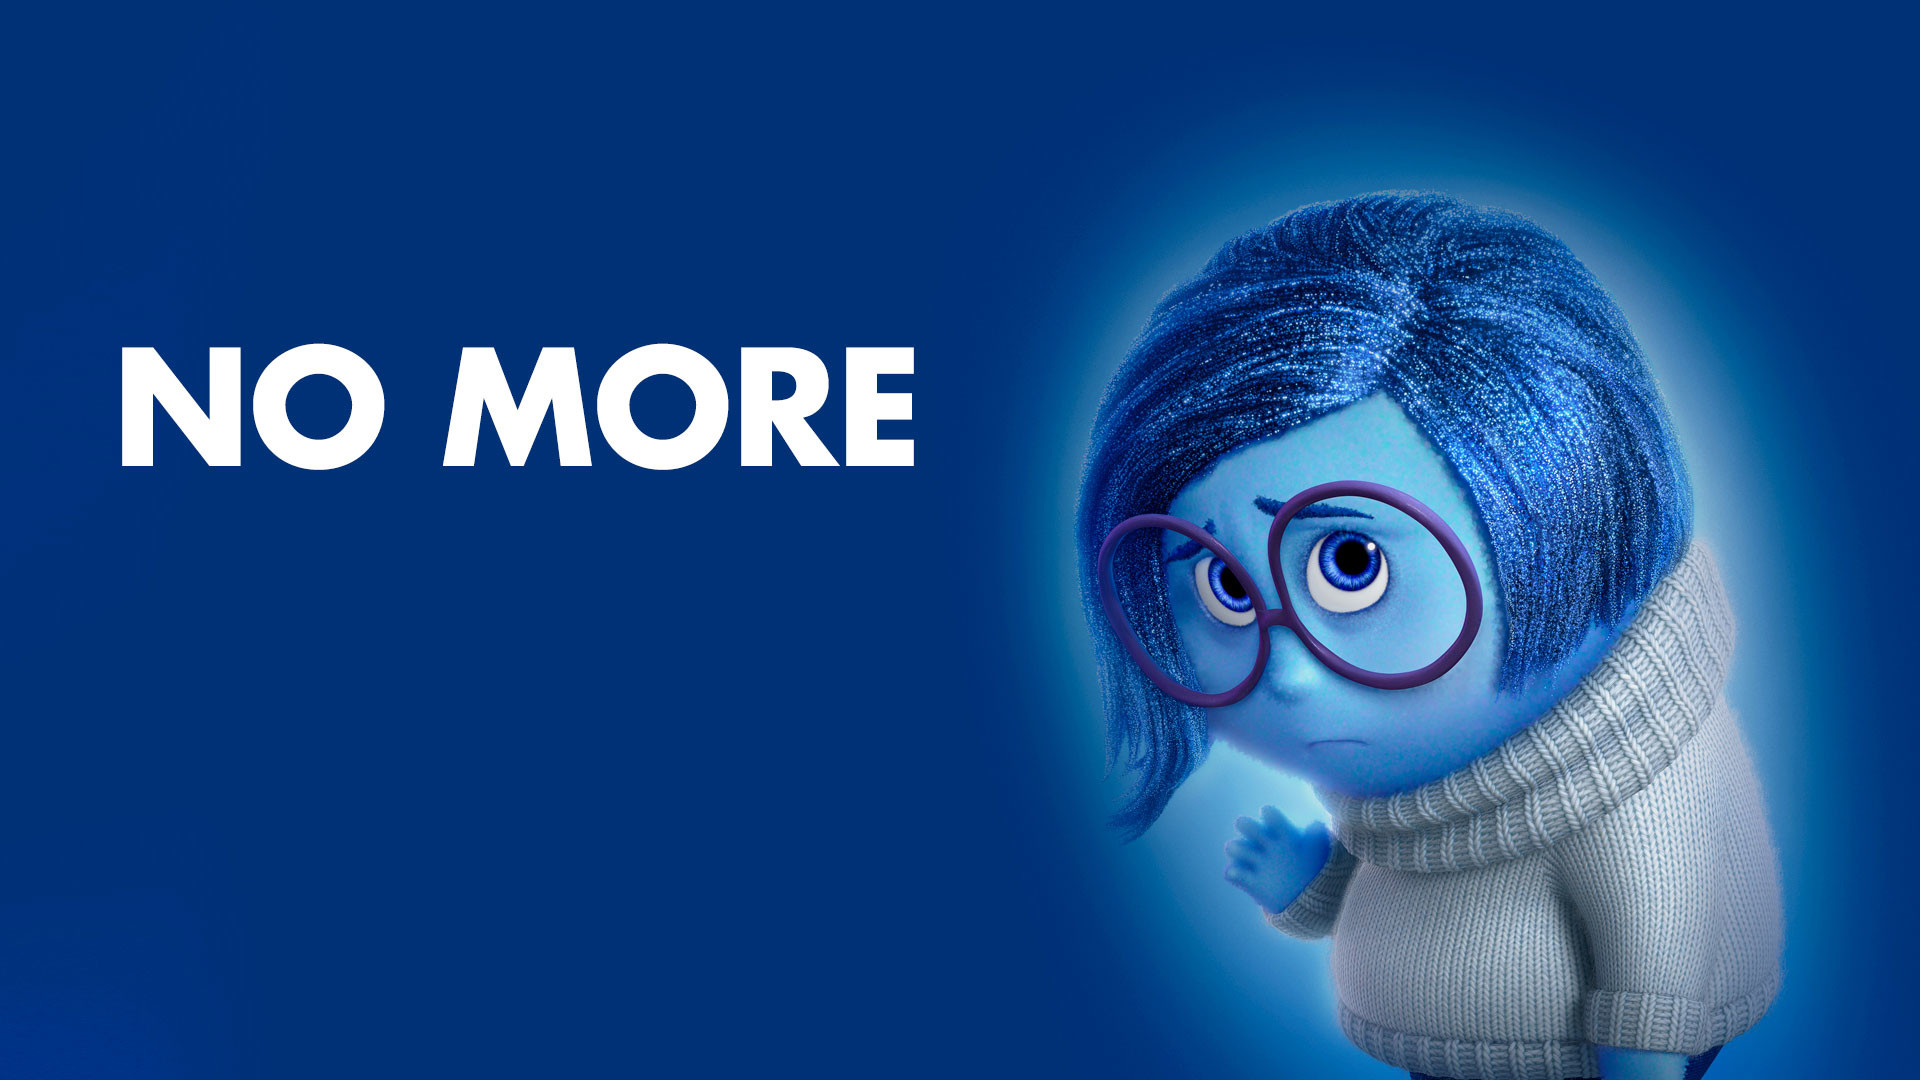 1920x1080 Disney Movie Inside Out 2015 Desktop Backgrounds & iPhone 6 Wallpapers .